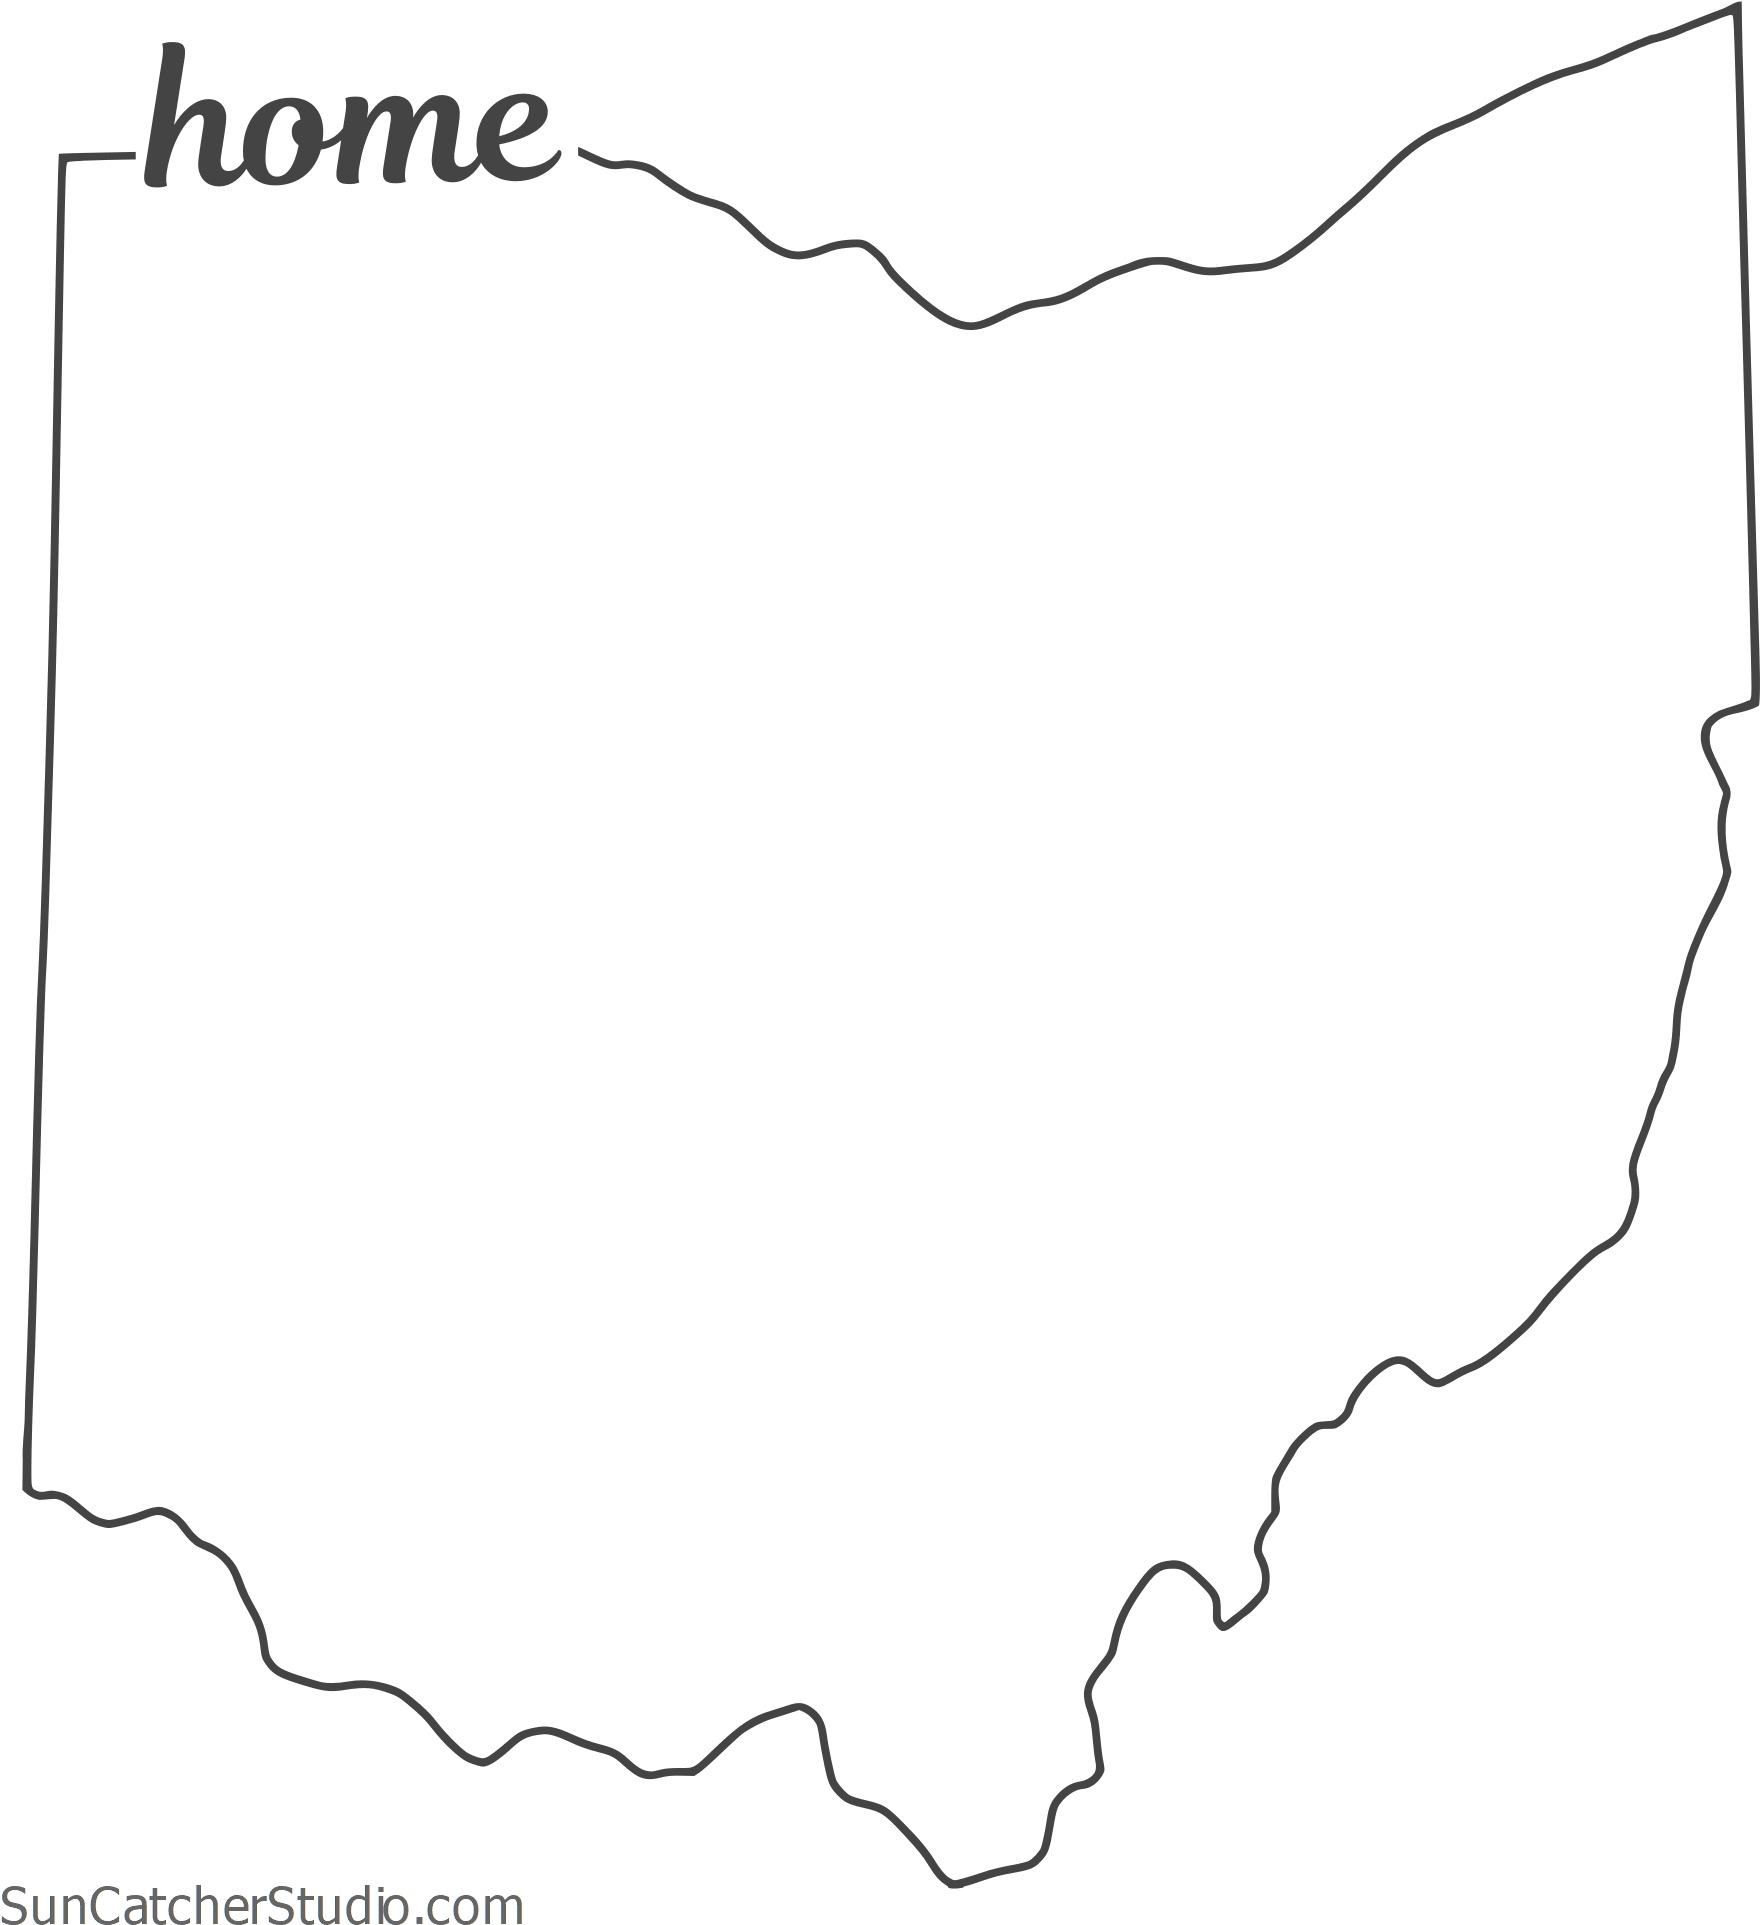 A Black Map Of The State Of Ohio